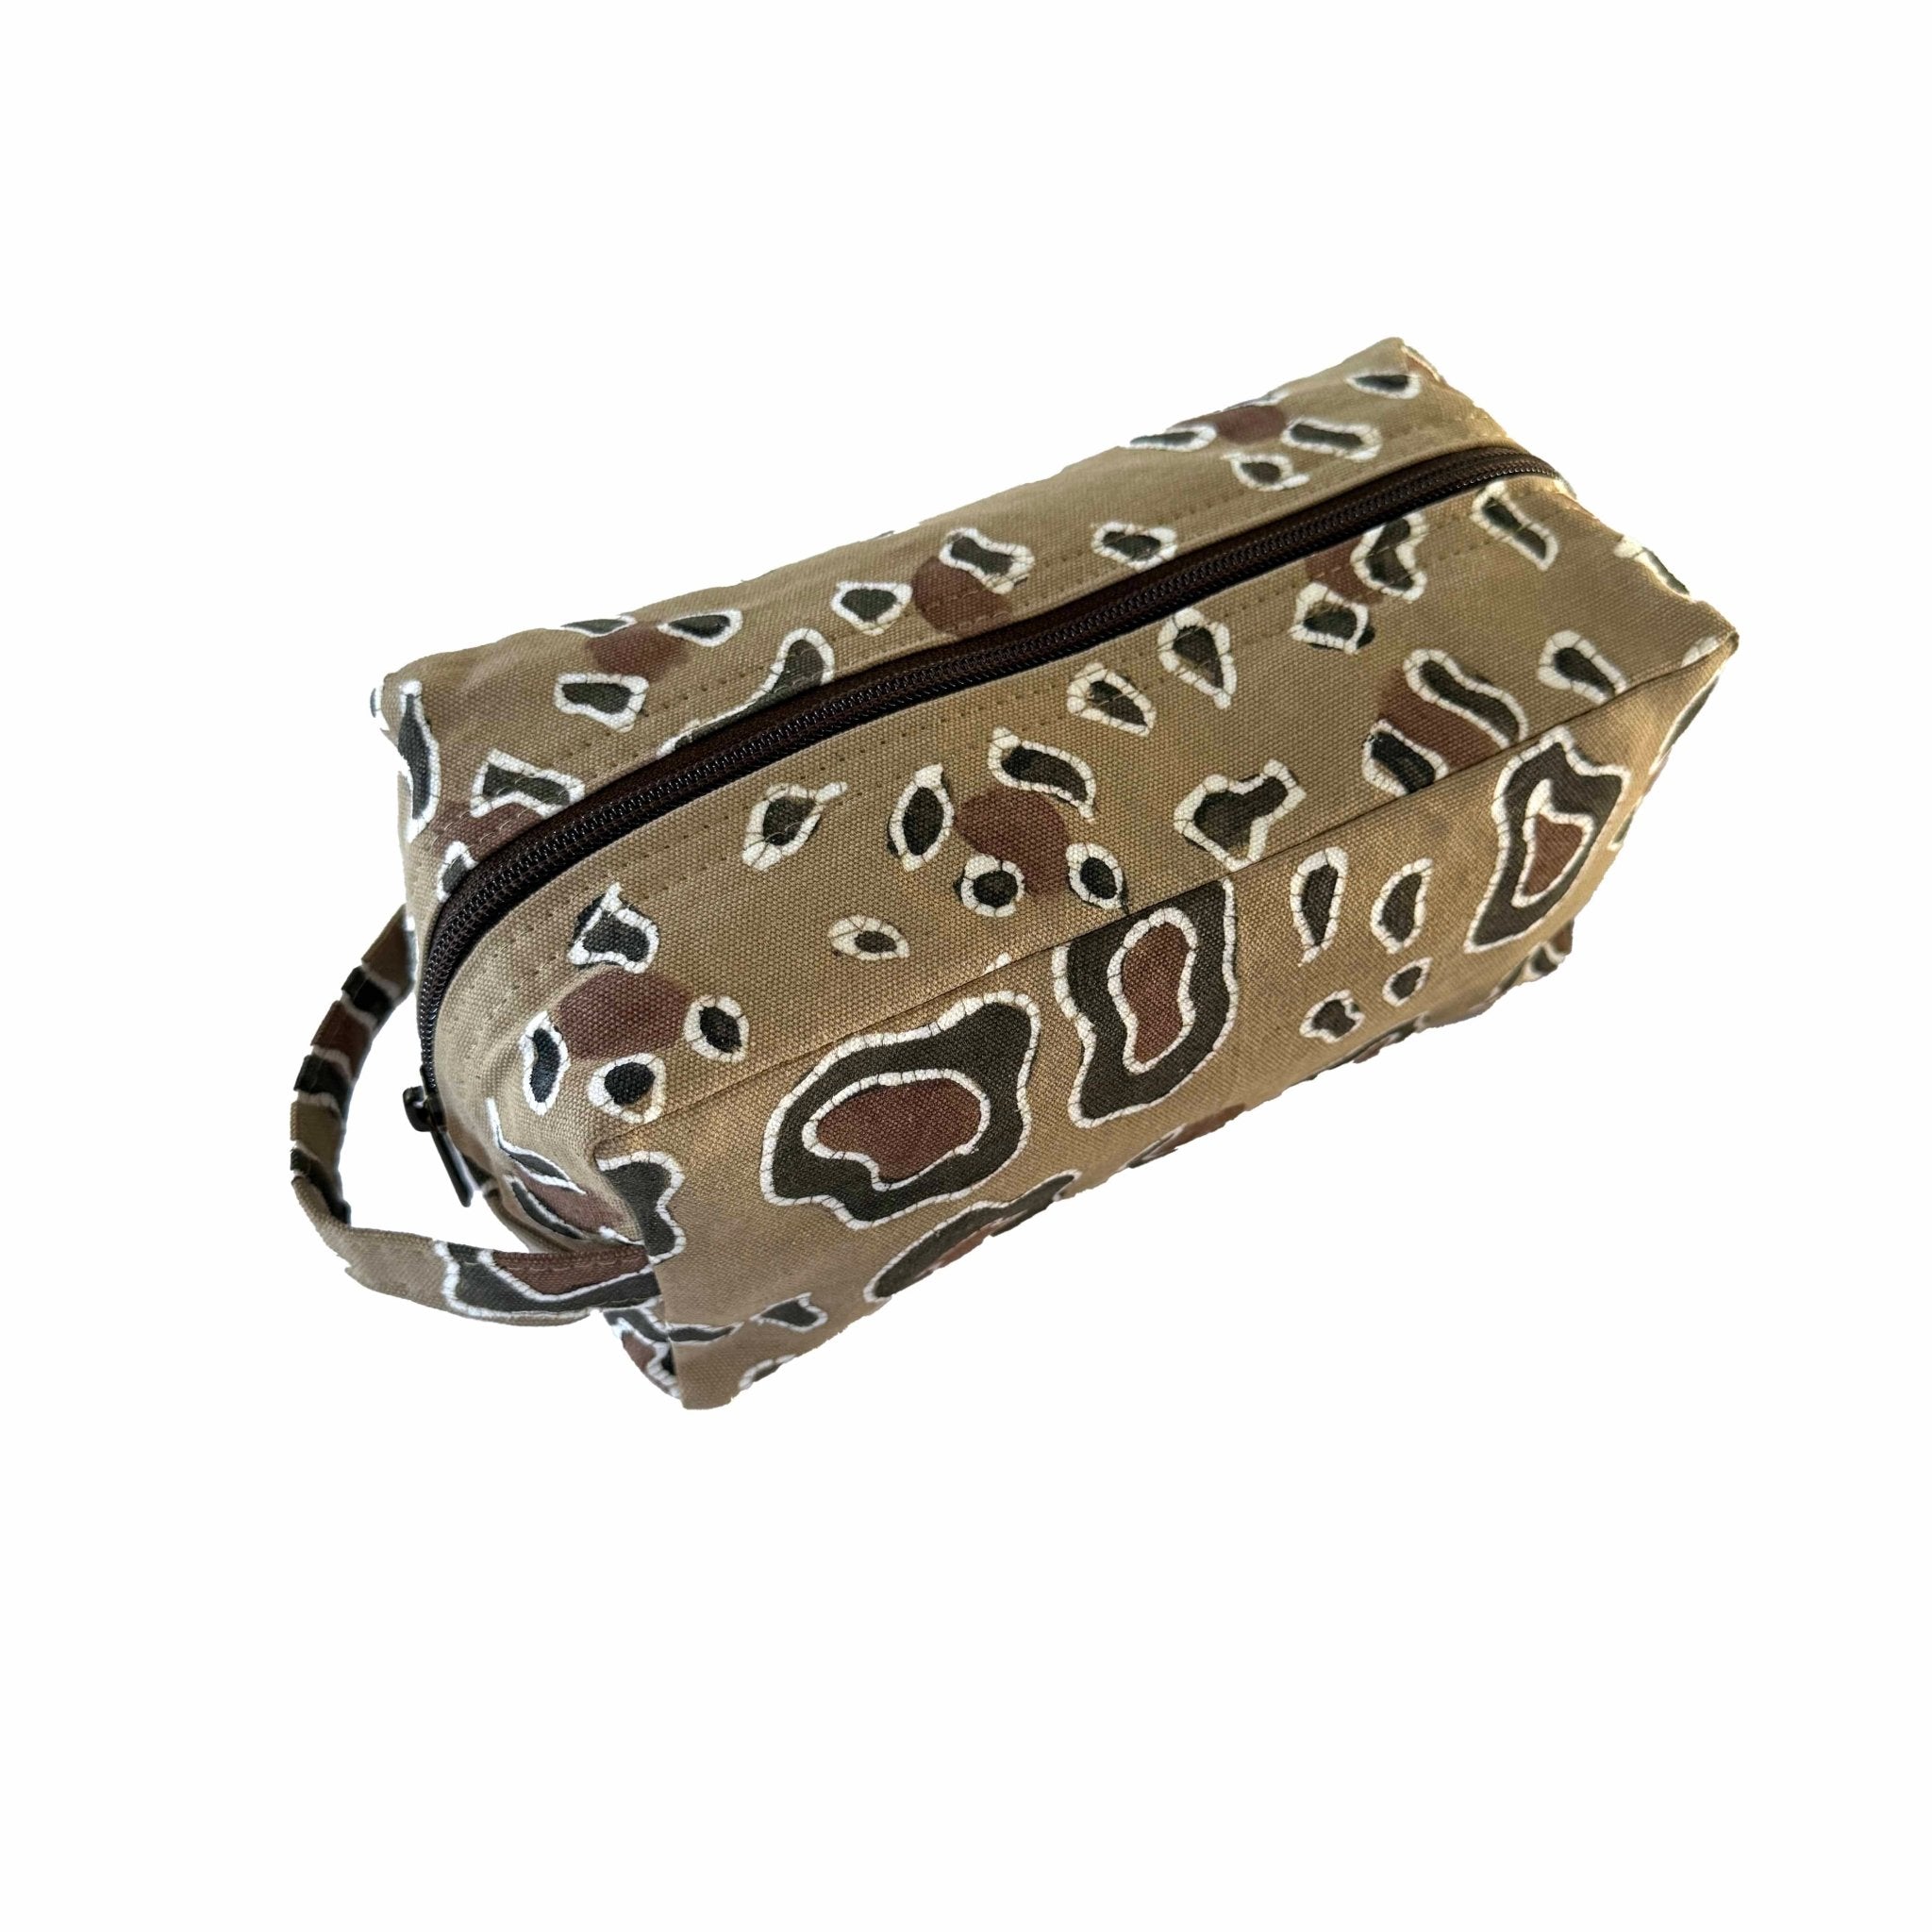 Mkupo Leopard Print Travel Pouch - Handmade by TRIBAL TEXTILES - Handcrafted Home Decor Interiors - African Made